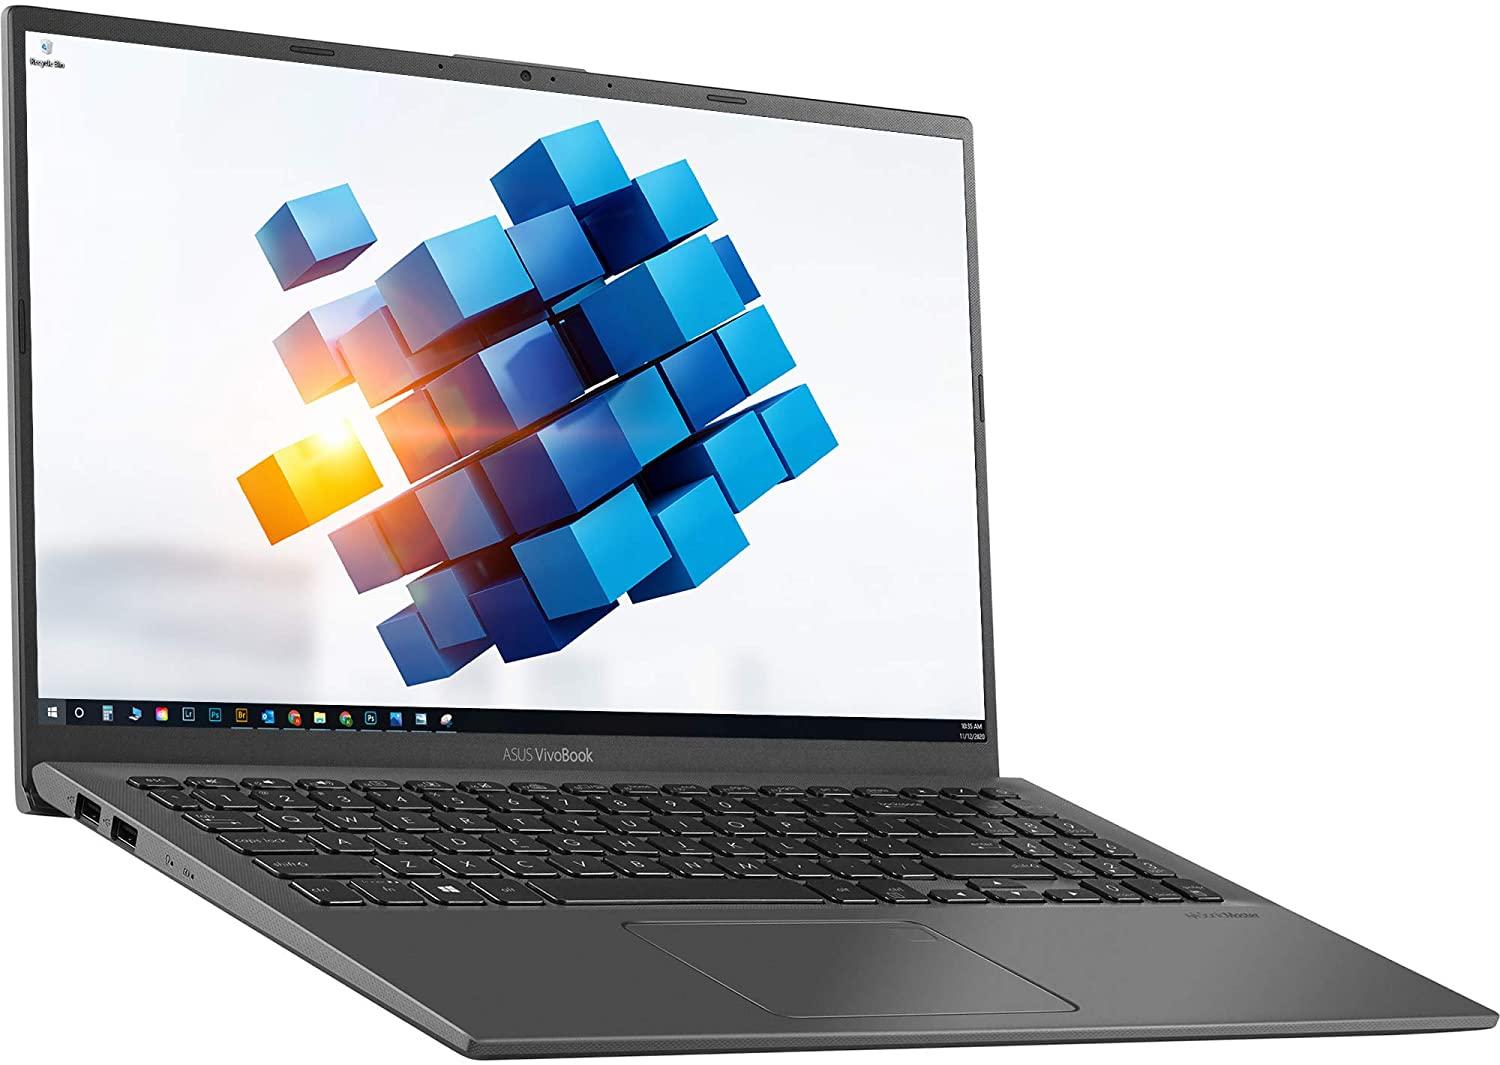 Asus VivoBook 15.6in i5-1035G1 8GB 256GB Notebook Laptop for $599.99 Shipped